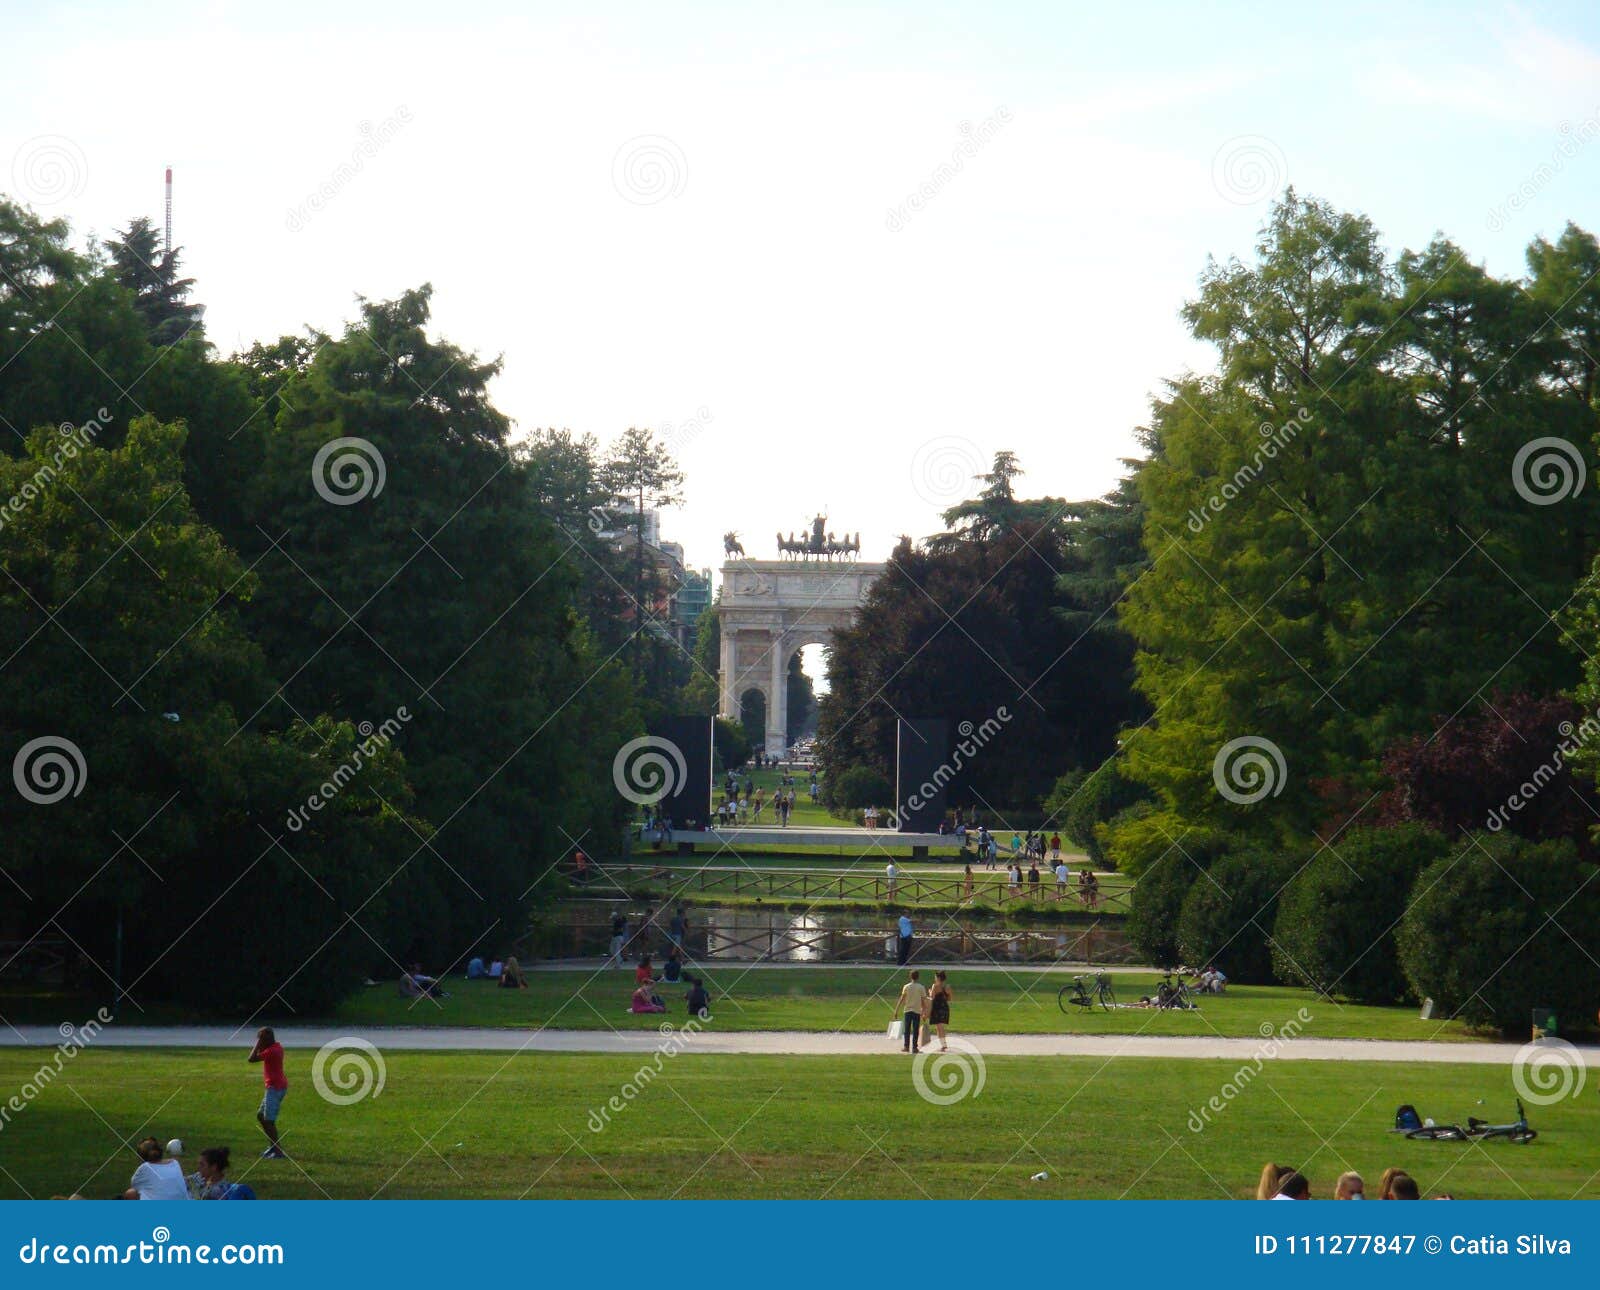 The Parck with the Arch stock image. Image of garden - 111277847